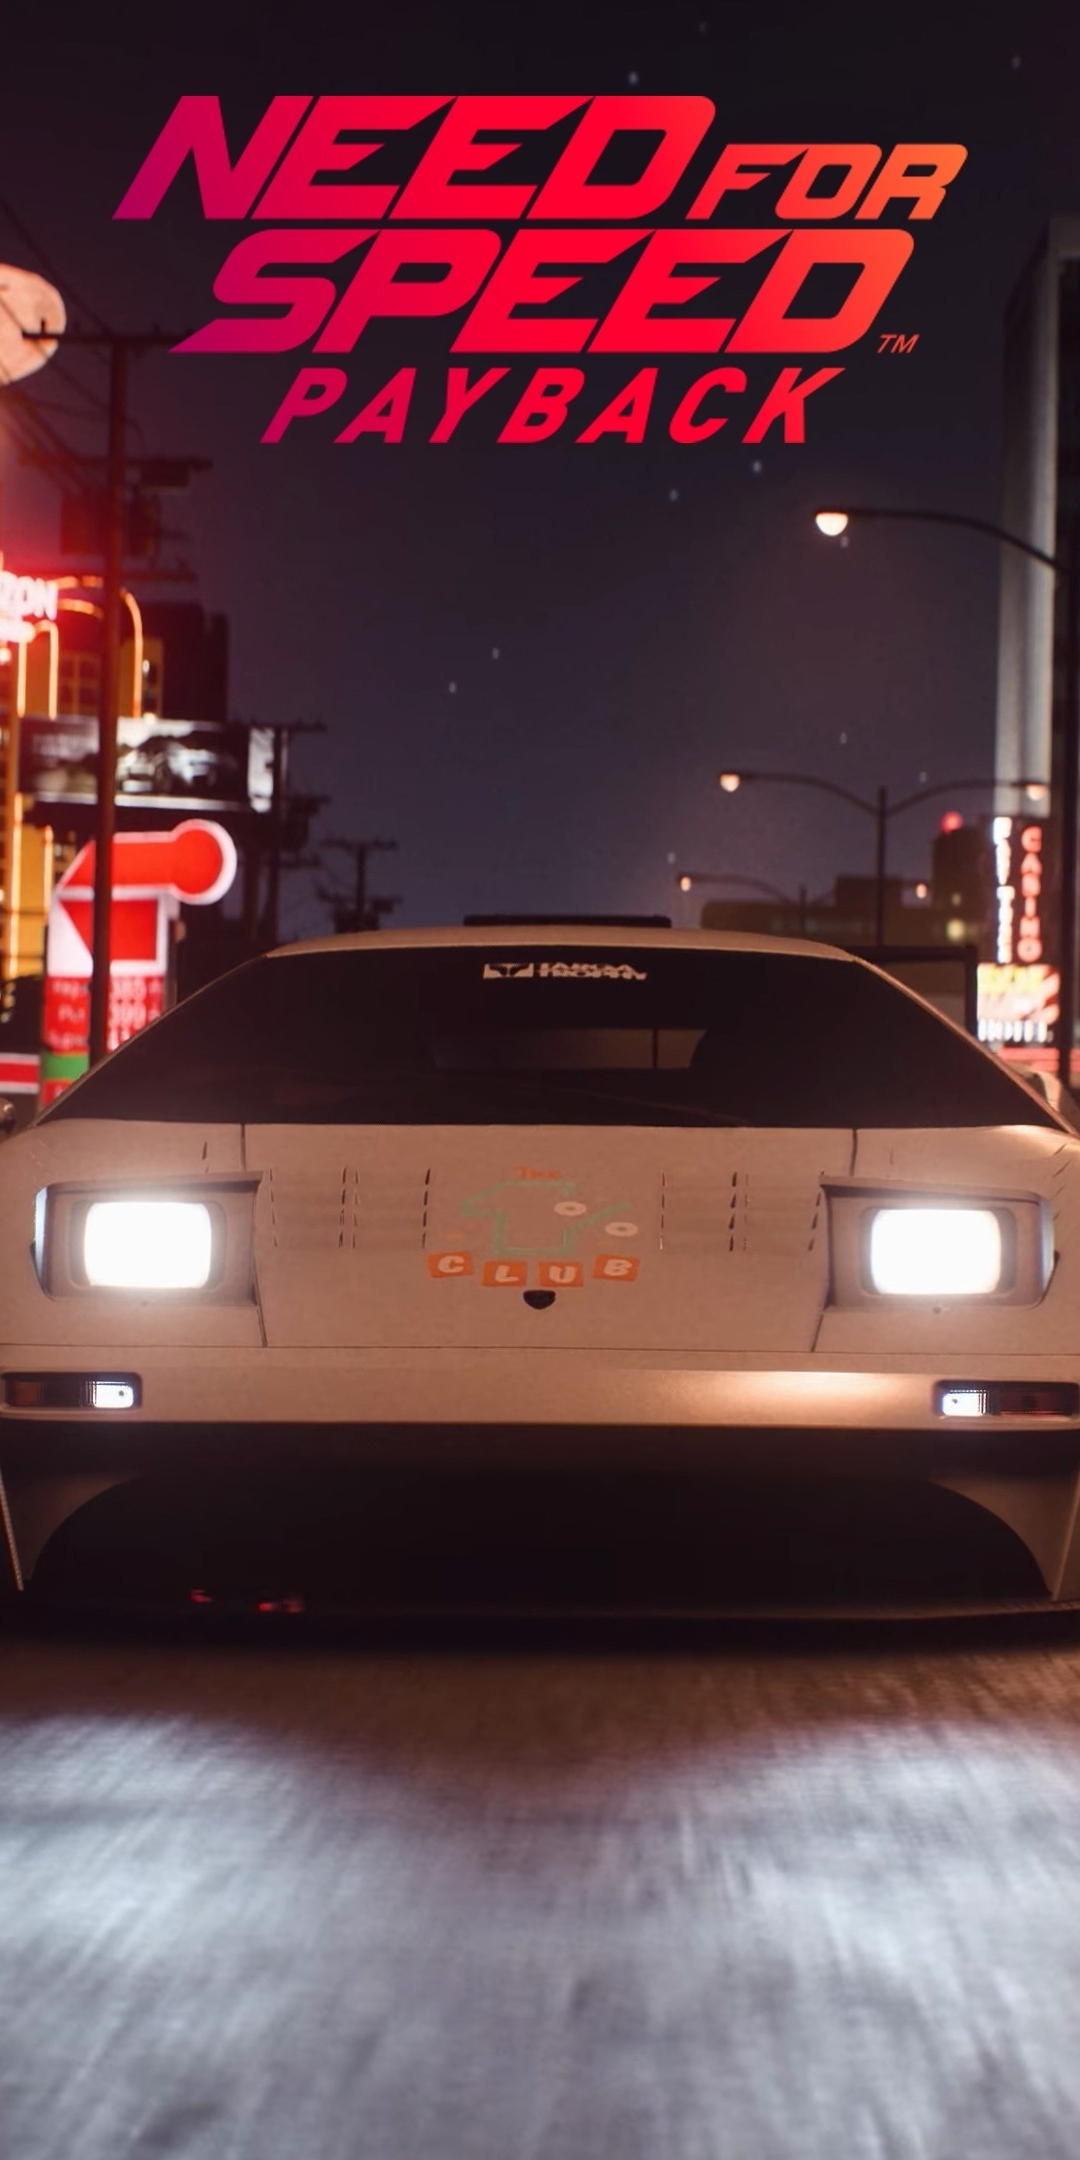 Need for speed payback, video game, Lamborghini, cars, 1080x2160 wallpaper